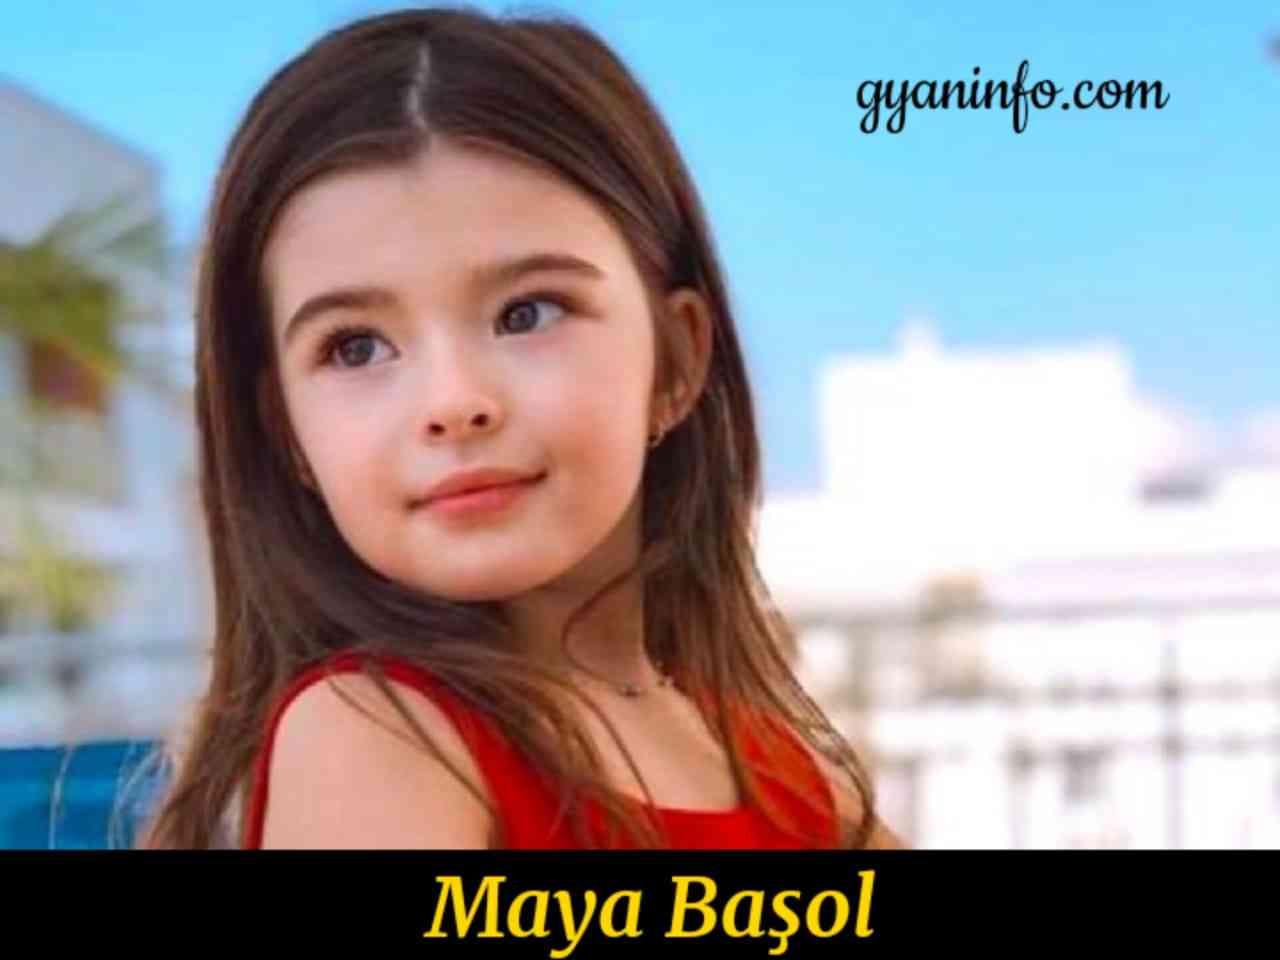 Maya Başol Biography, Height, Age, Weight, Body Measurements, Relationship, Family, Parents, Net Worth, Wiki & More